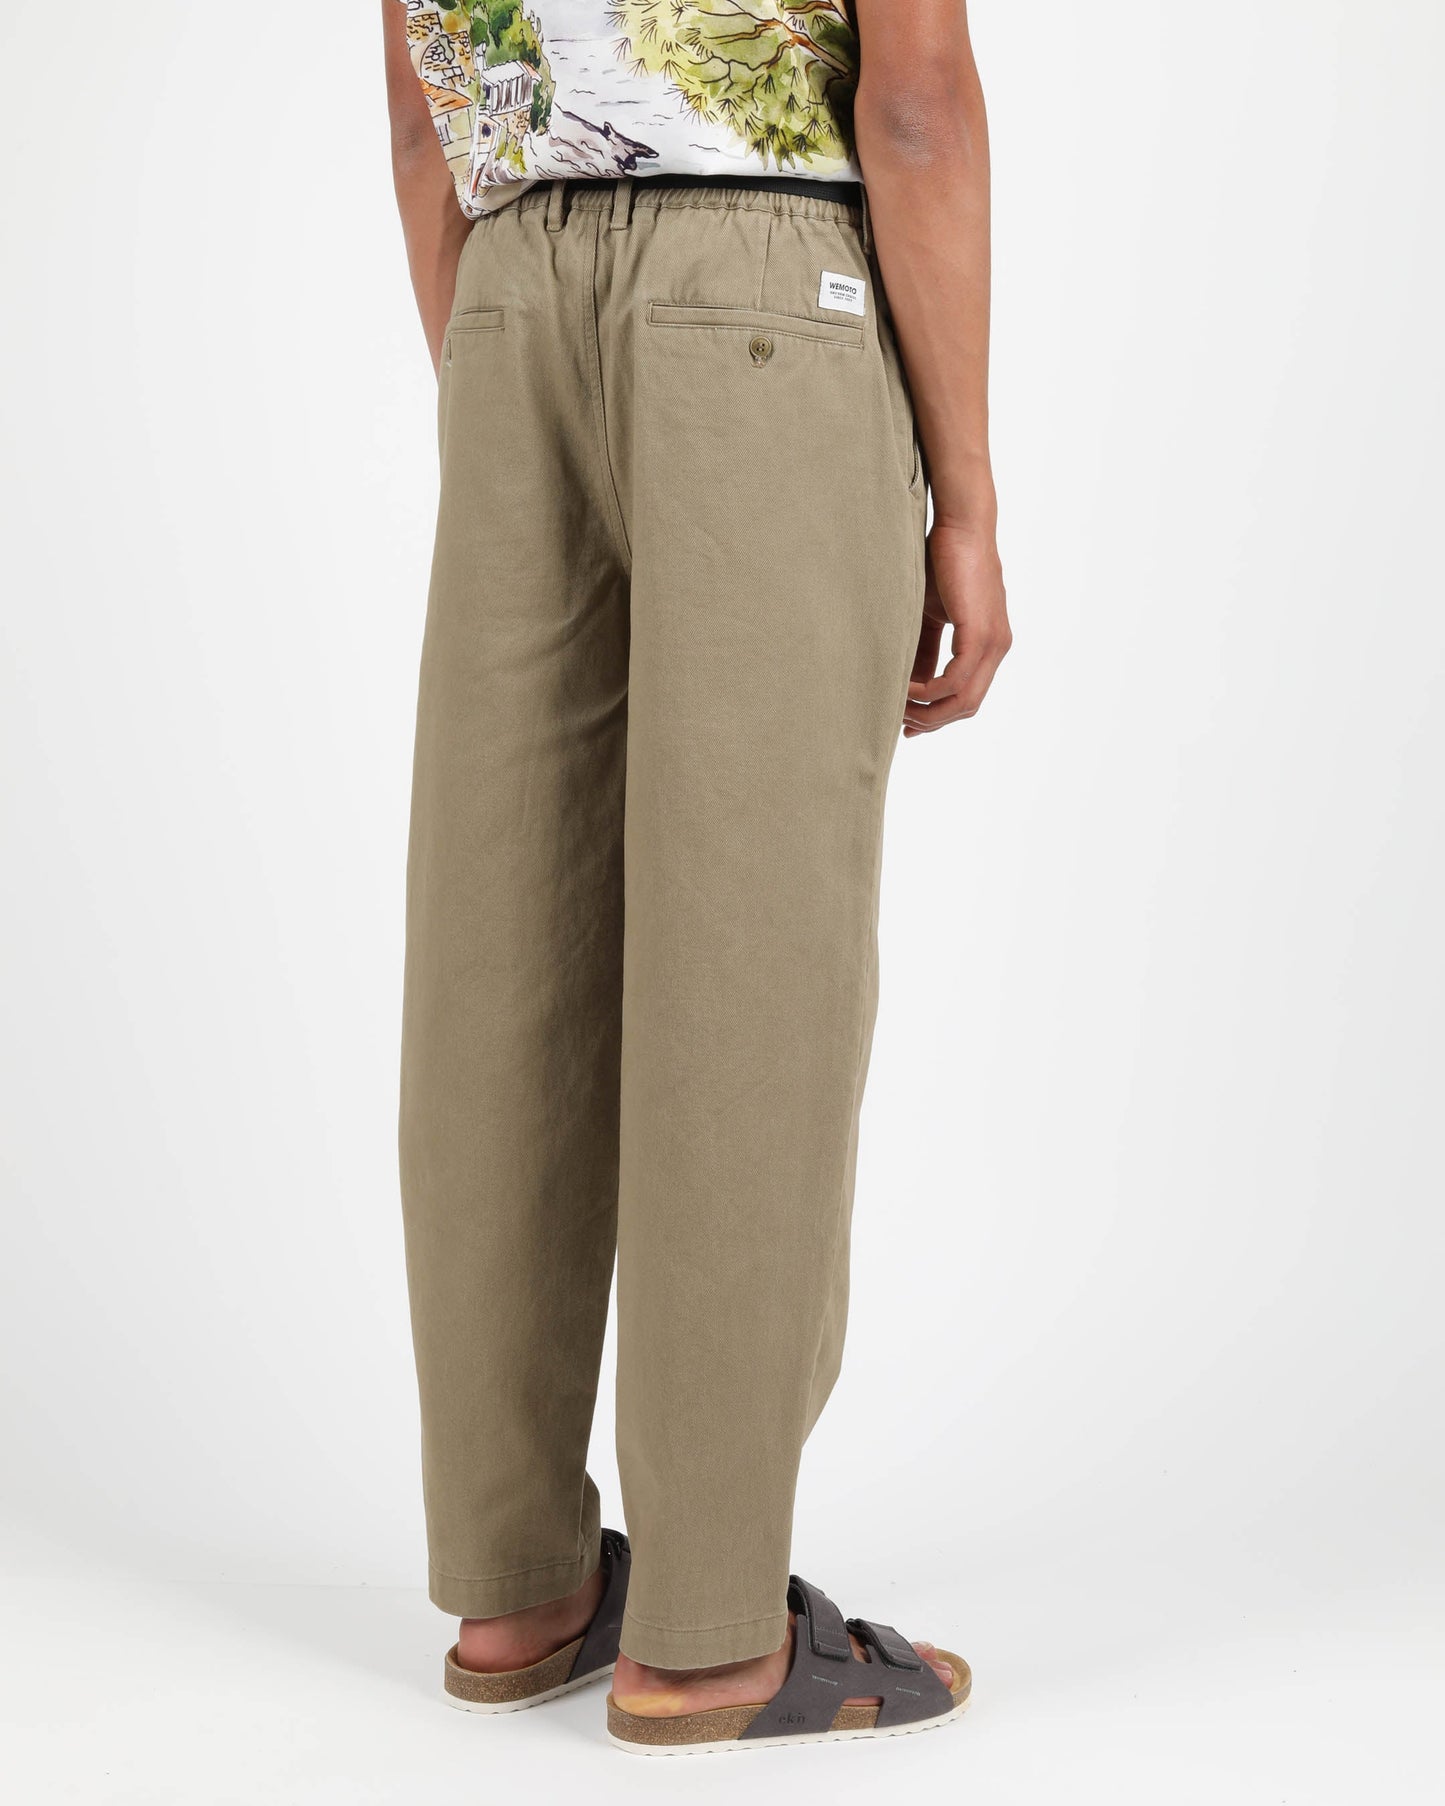 Grover 275 Twill Pant